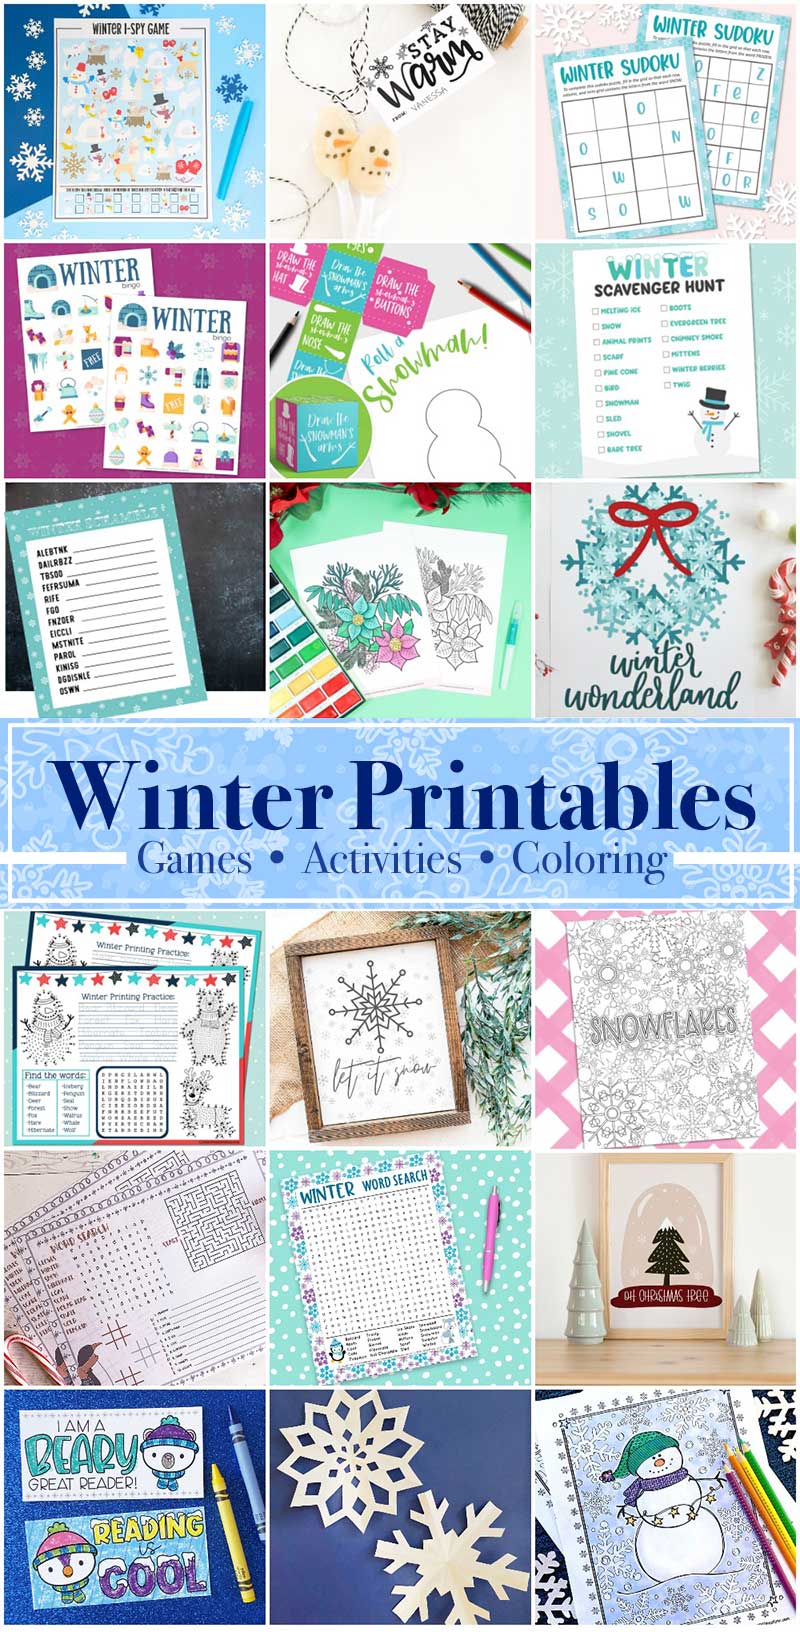 Winter printables - games, activities and coloring sheets